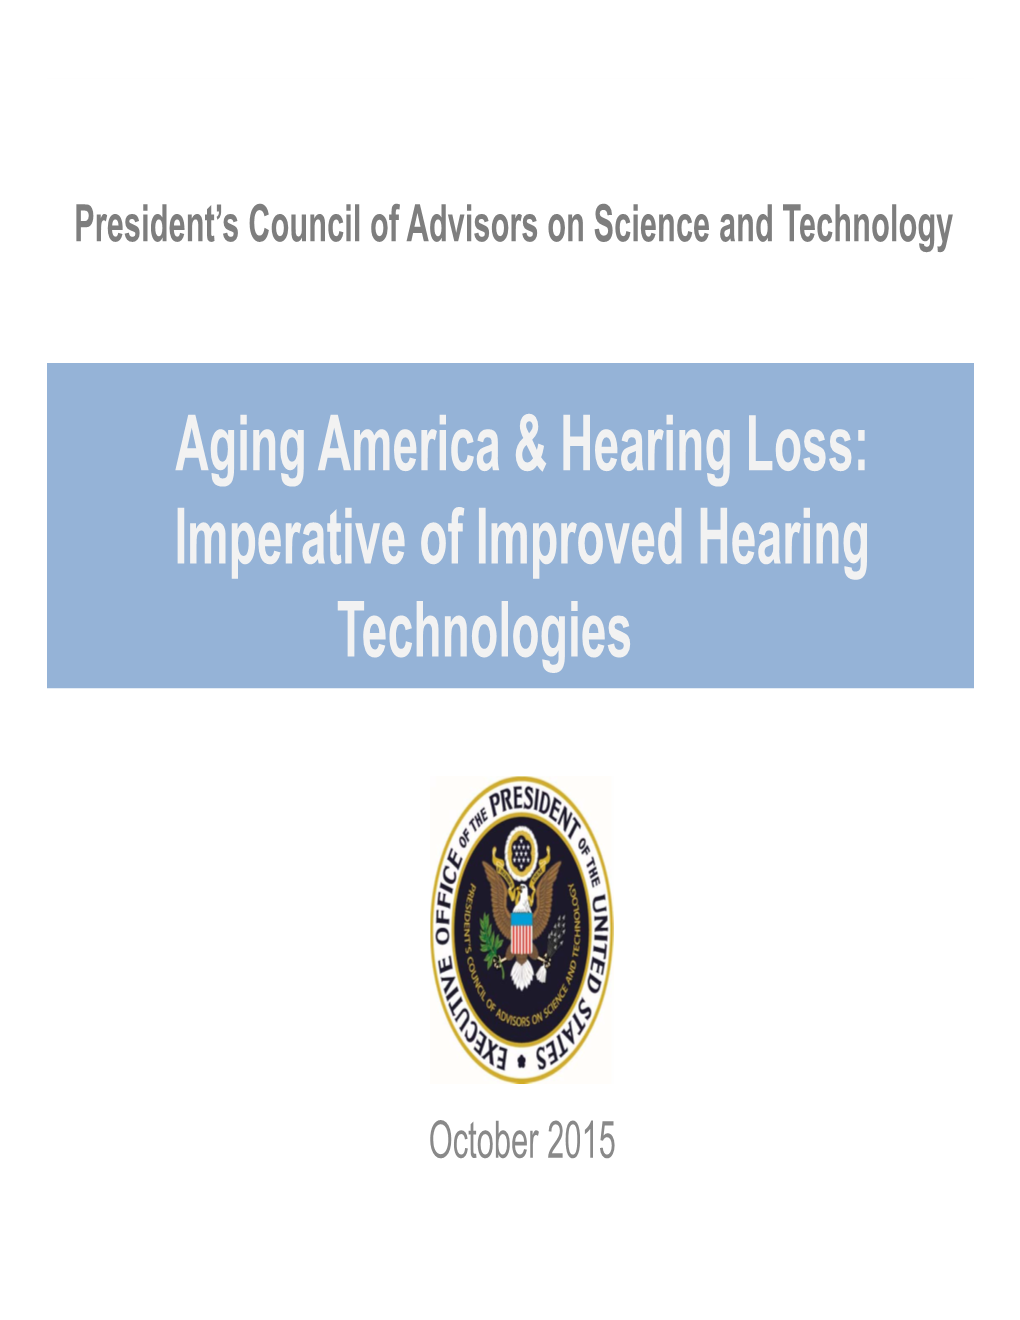 Aging America & Hearing Loss: Imperative of Improved